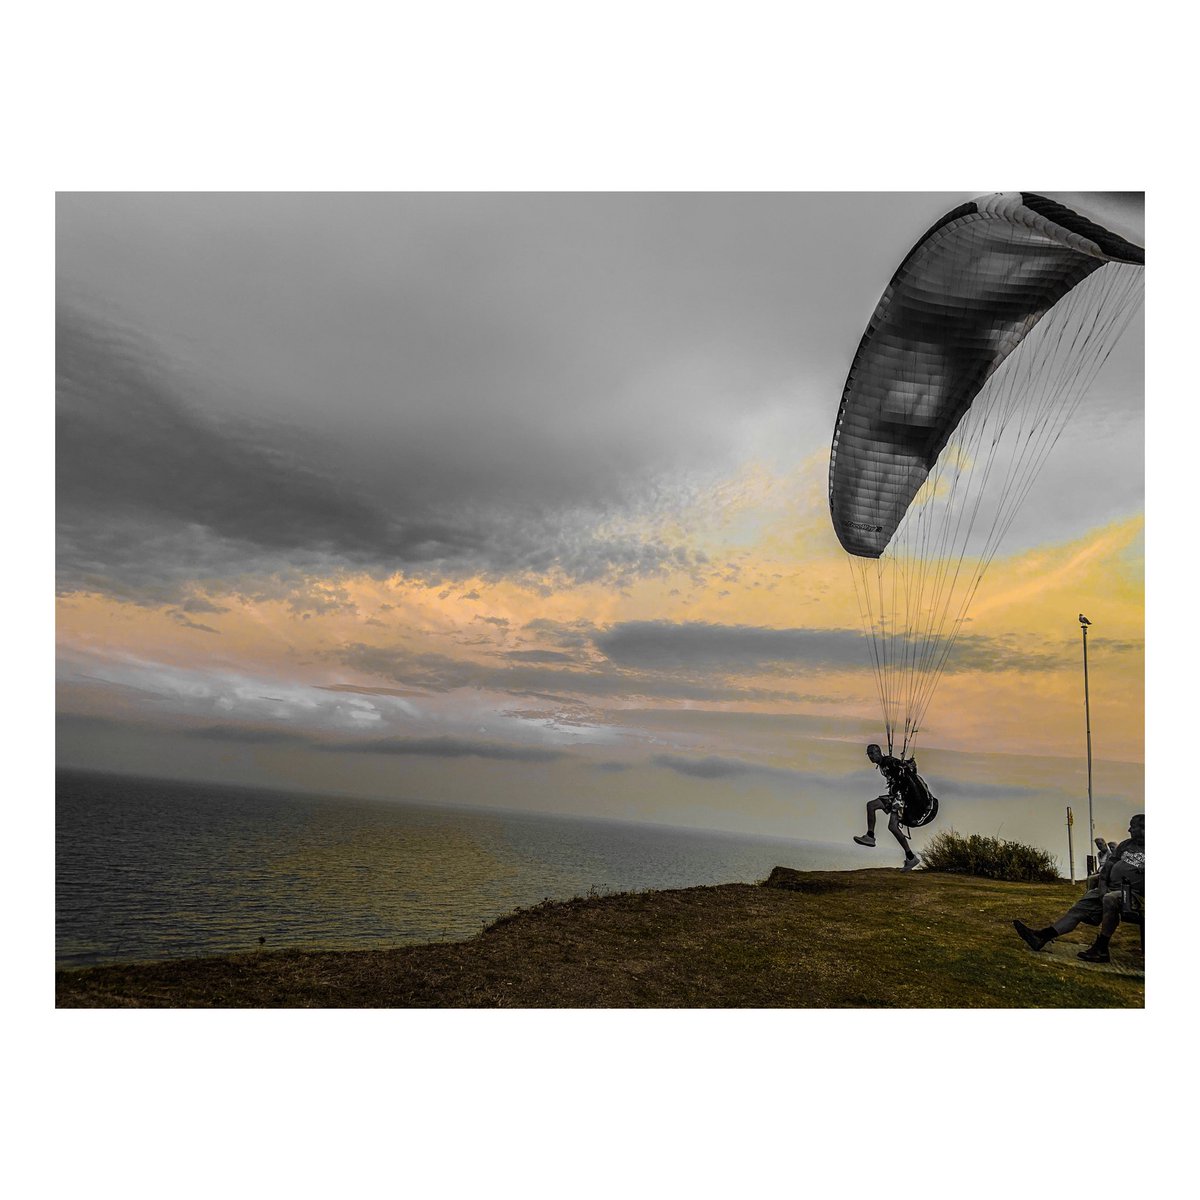 Another pic.. #paraglider #Eastsussex #Galleyhill 12.08.20